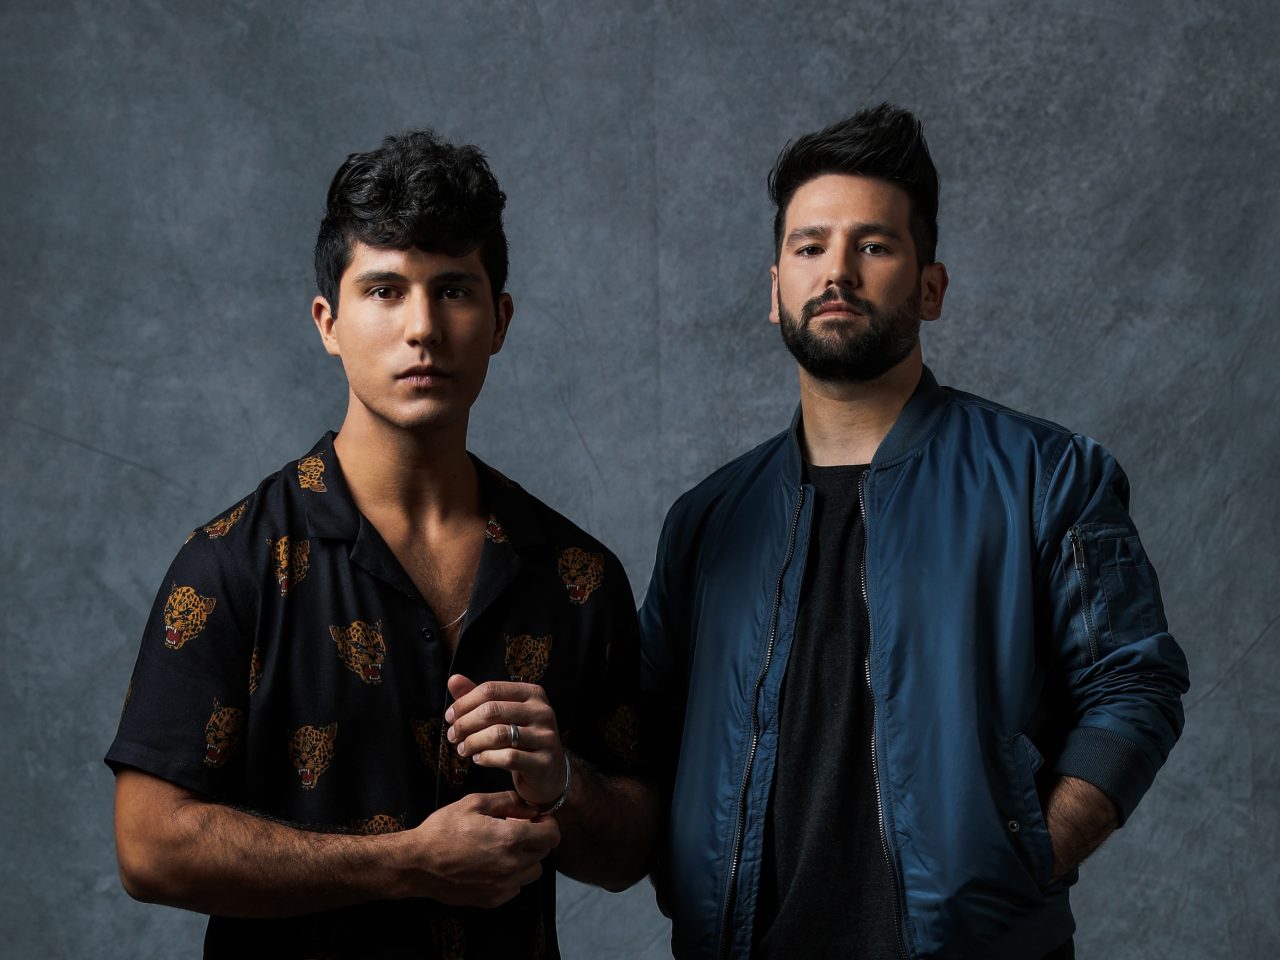 Dan + Shay Are Headed Down Under With Shawn Mendes